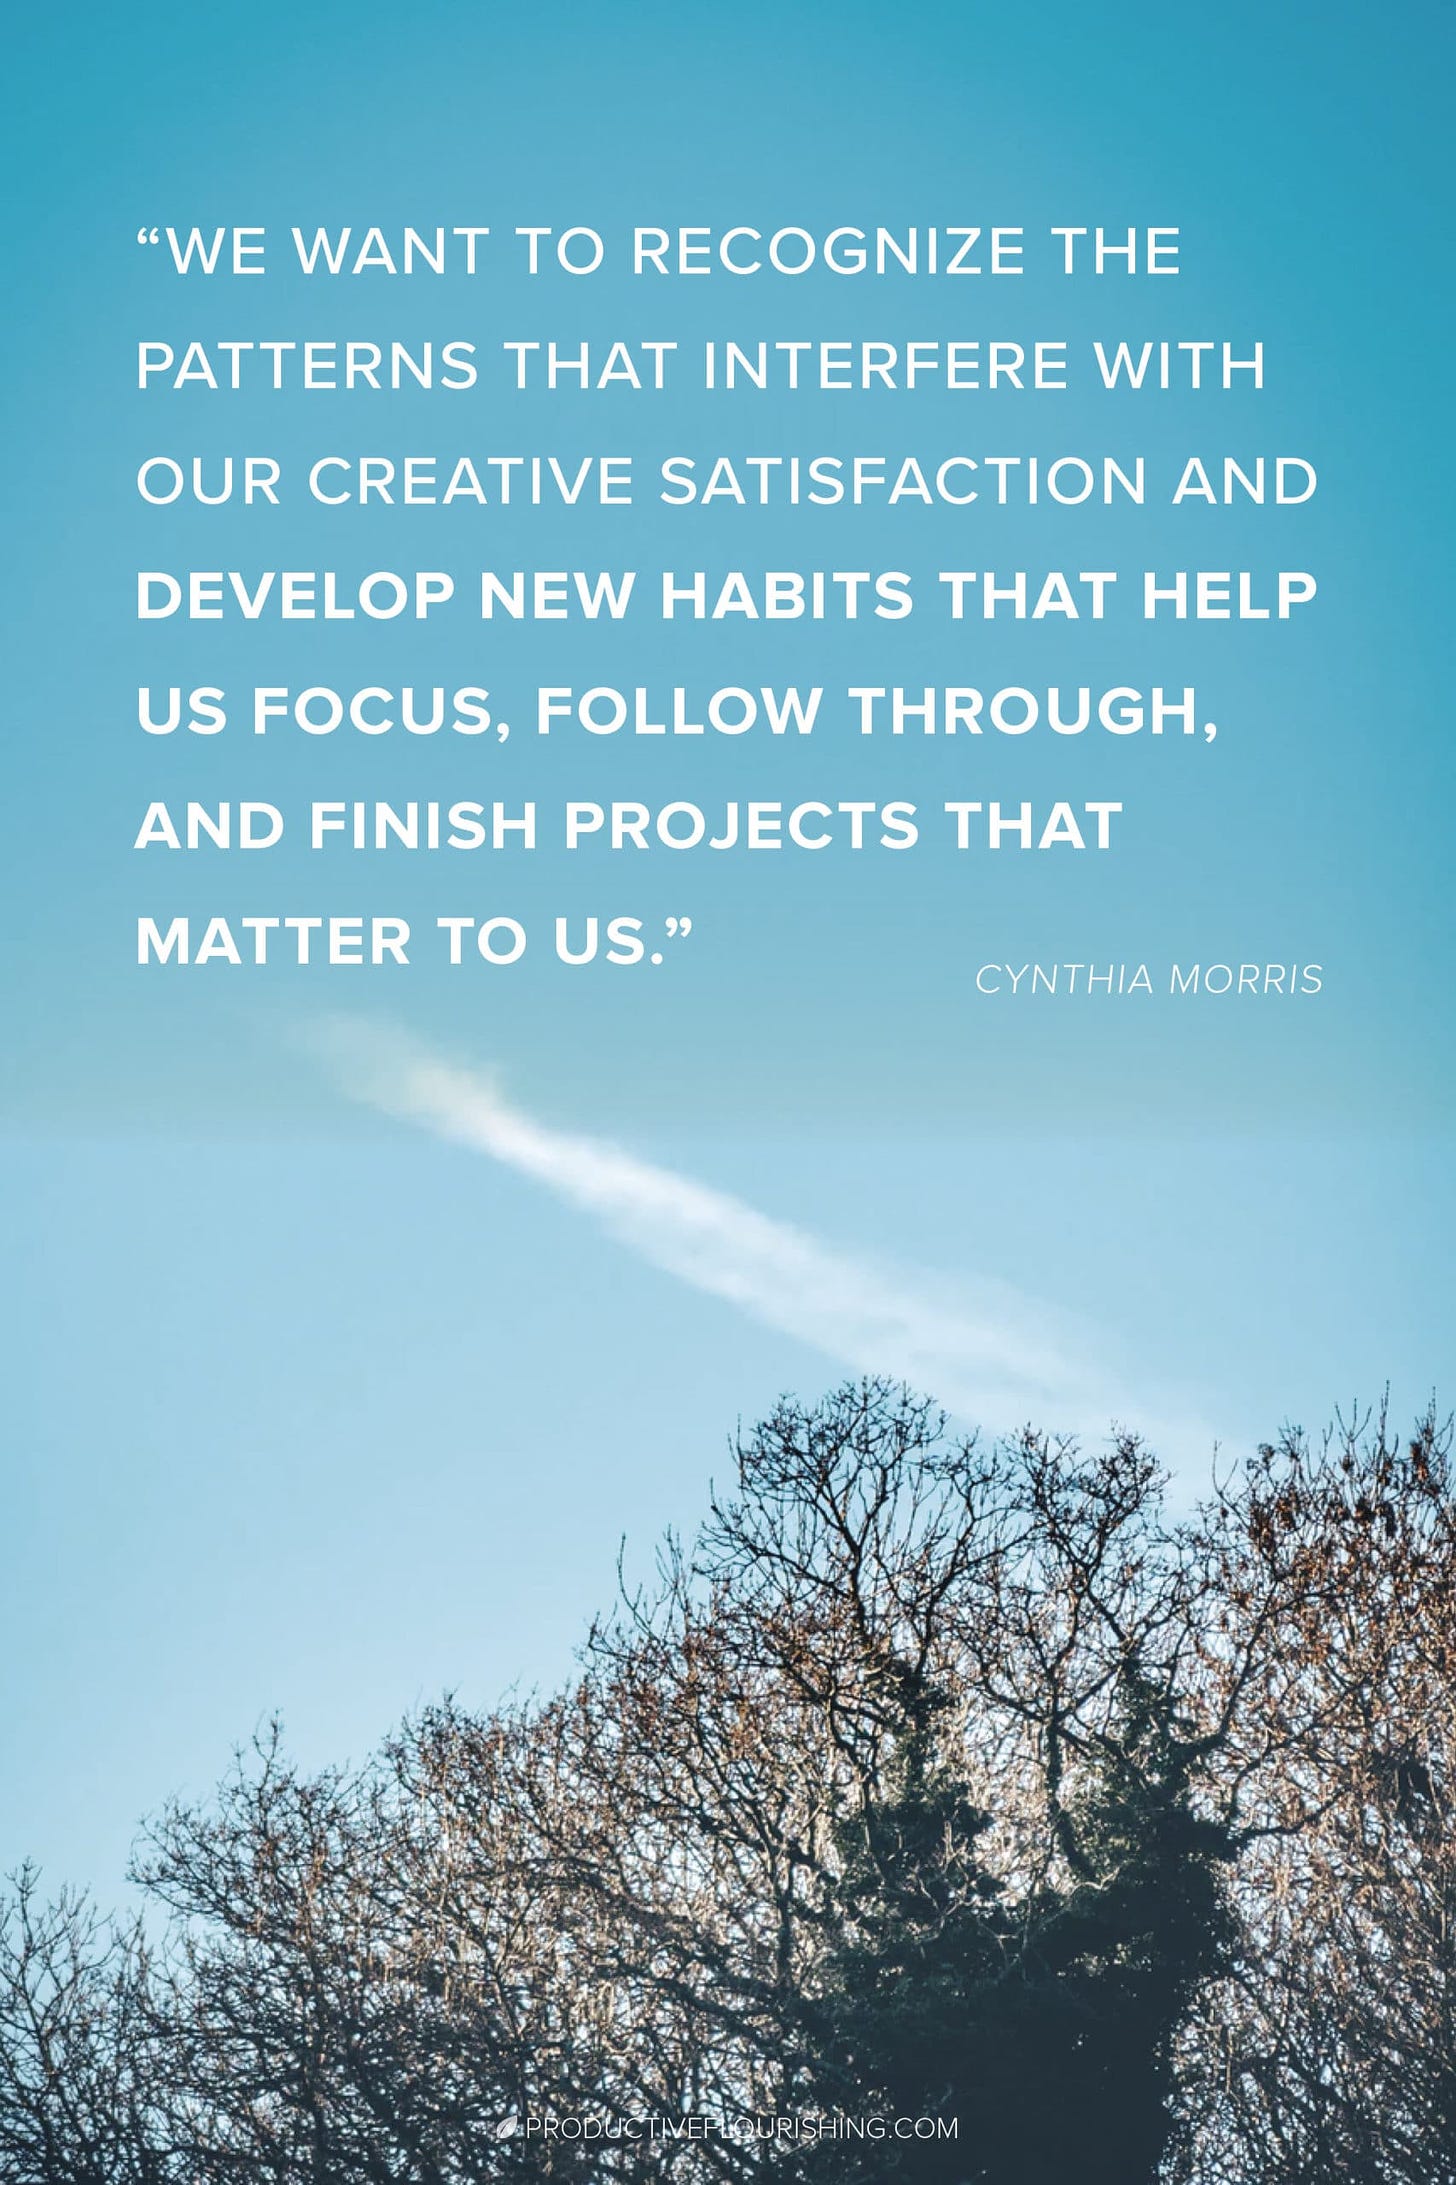 Focusing + Productivity Tips: Finish what you started. Guest author, Cynthia Morris, shares 5 easy ways to complete the task at hand and resist the Bright Shiny Object Syndrome. As creative individuals, we can find ourselves jumping to the top of the creative process funnel before finishing the original project we started. This is how to stay focused and complete the project! #finishwhatyoustarted #productiveflourishing